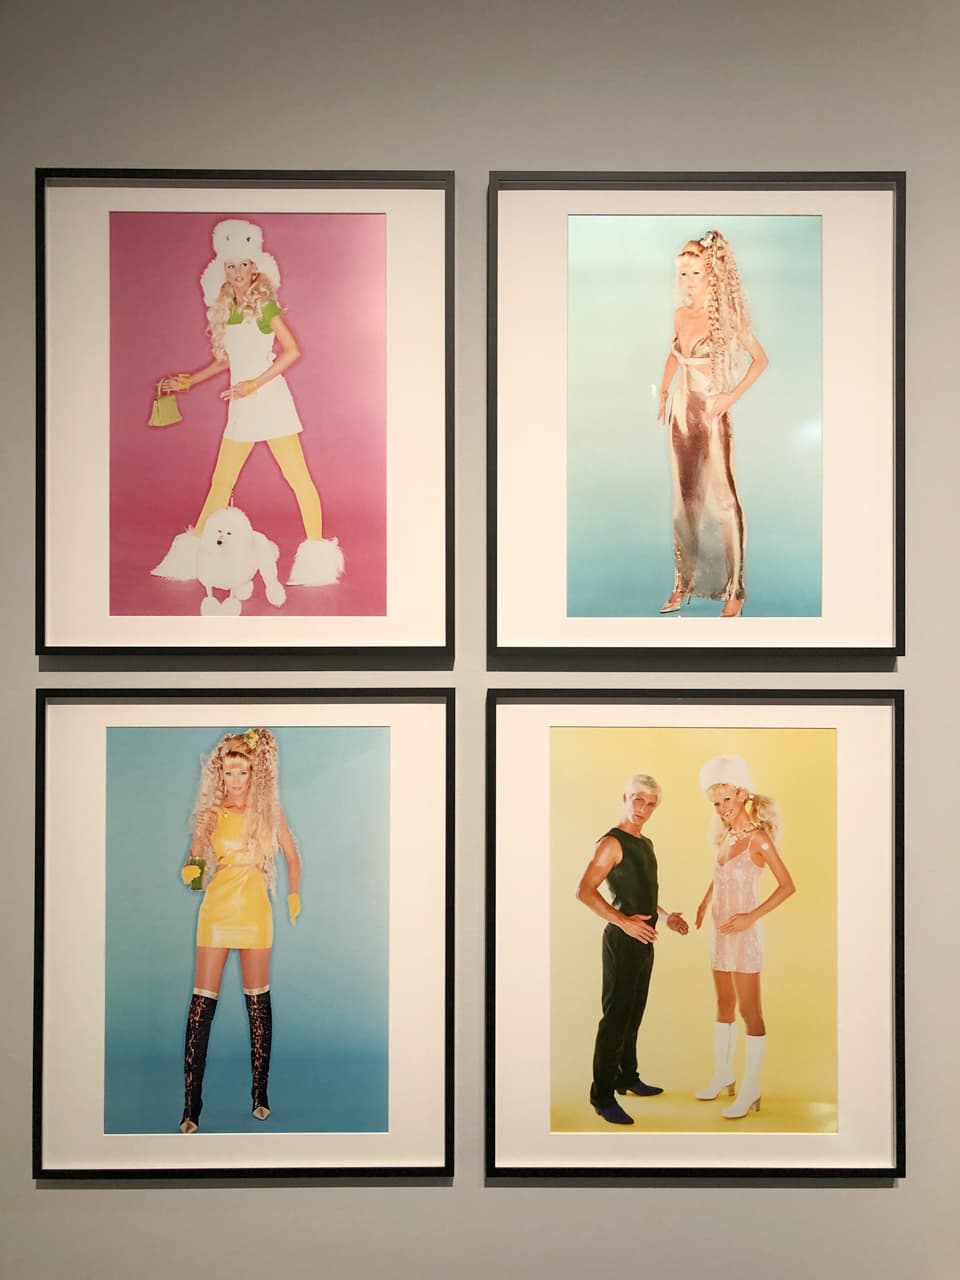 Four framed editorial photos from the '90s portraying a man and a woman against pink, blue, and yellow backgrounds